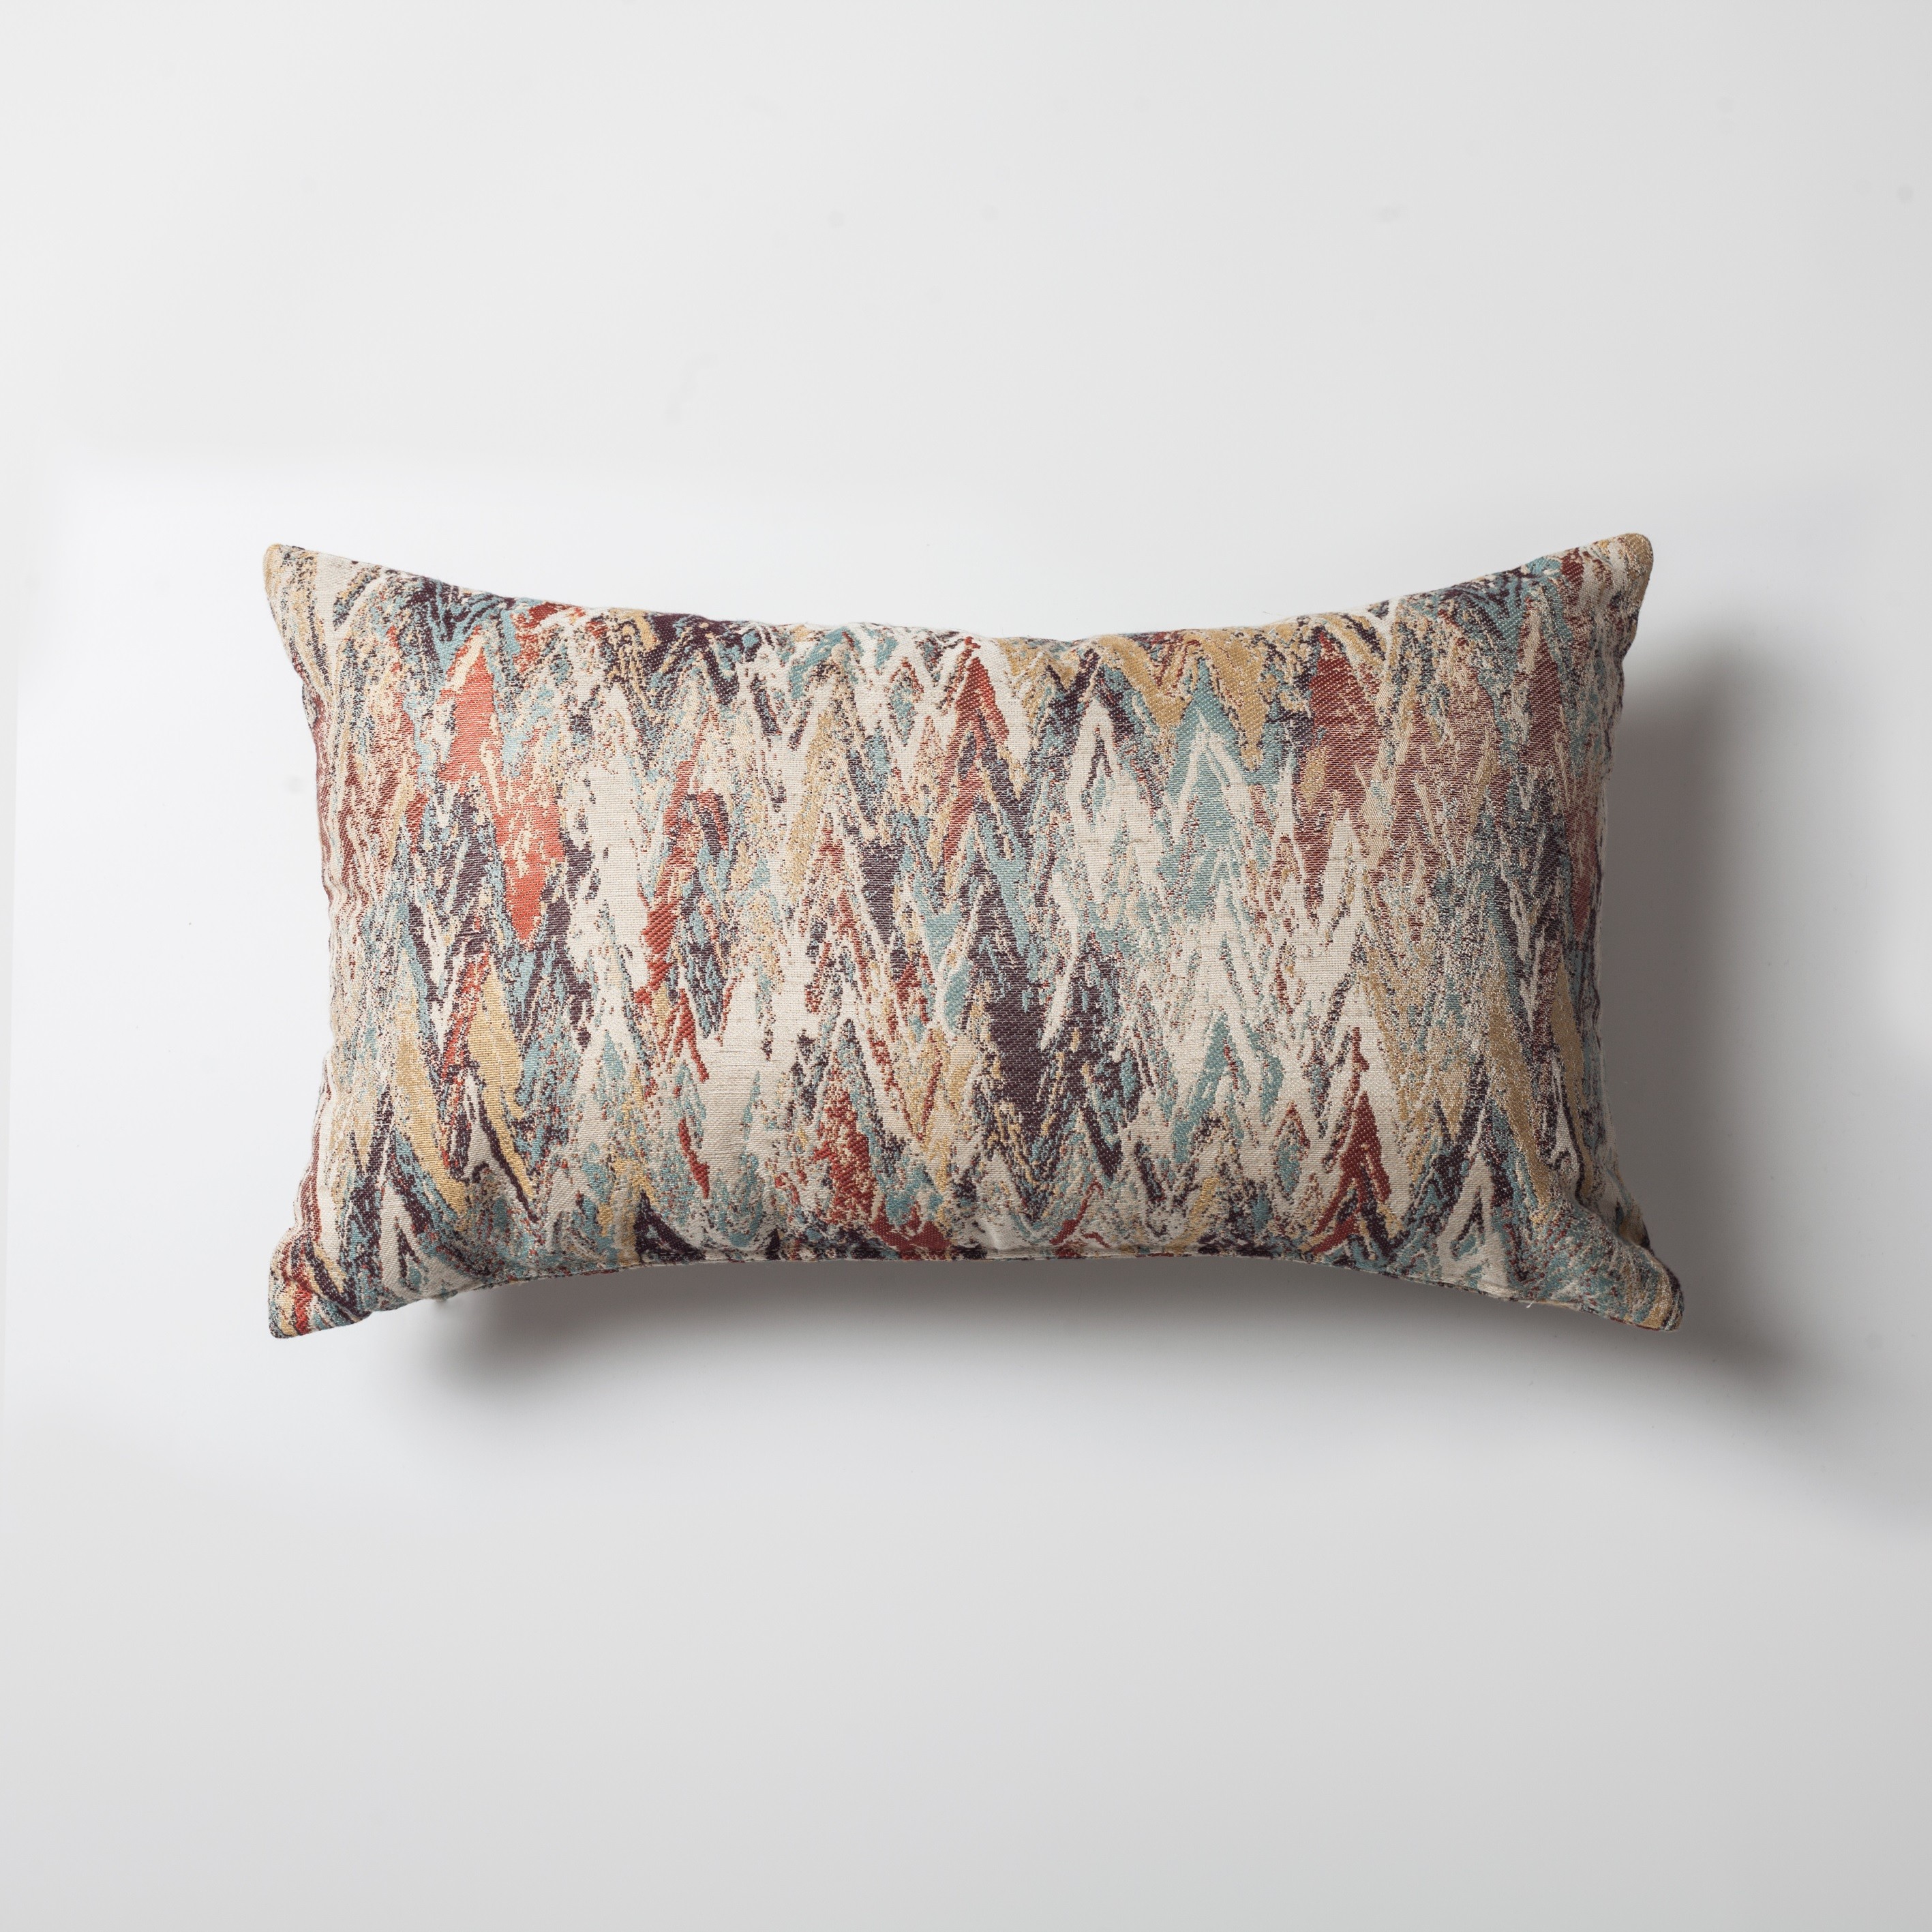 "Genoa" - Watercolor Effect Patterned Linen Pillow 12x20 Inch (Cover Only)